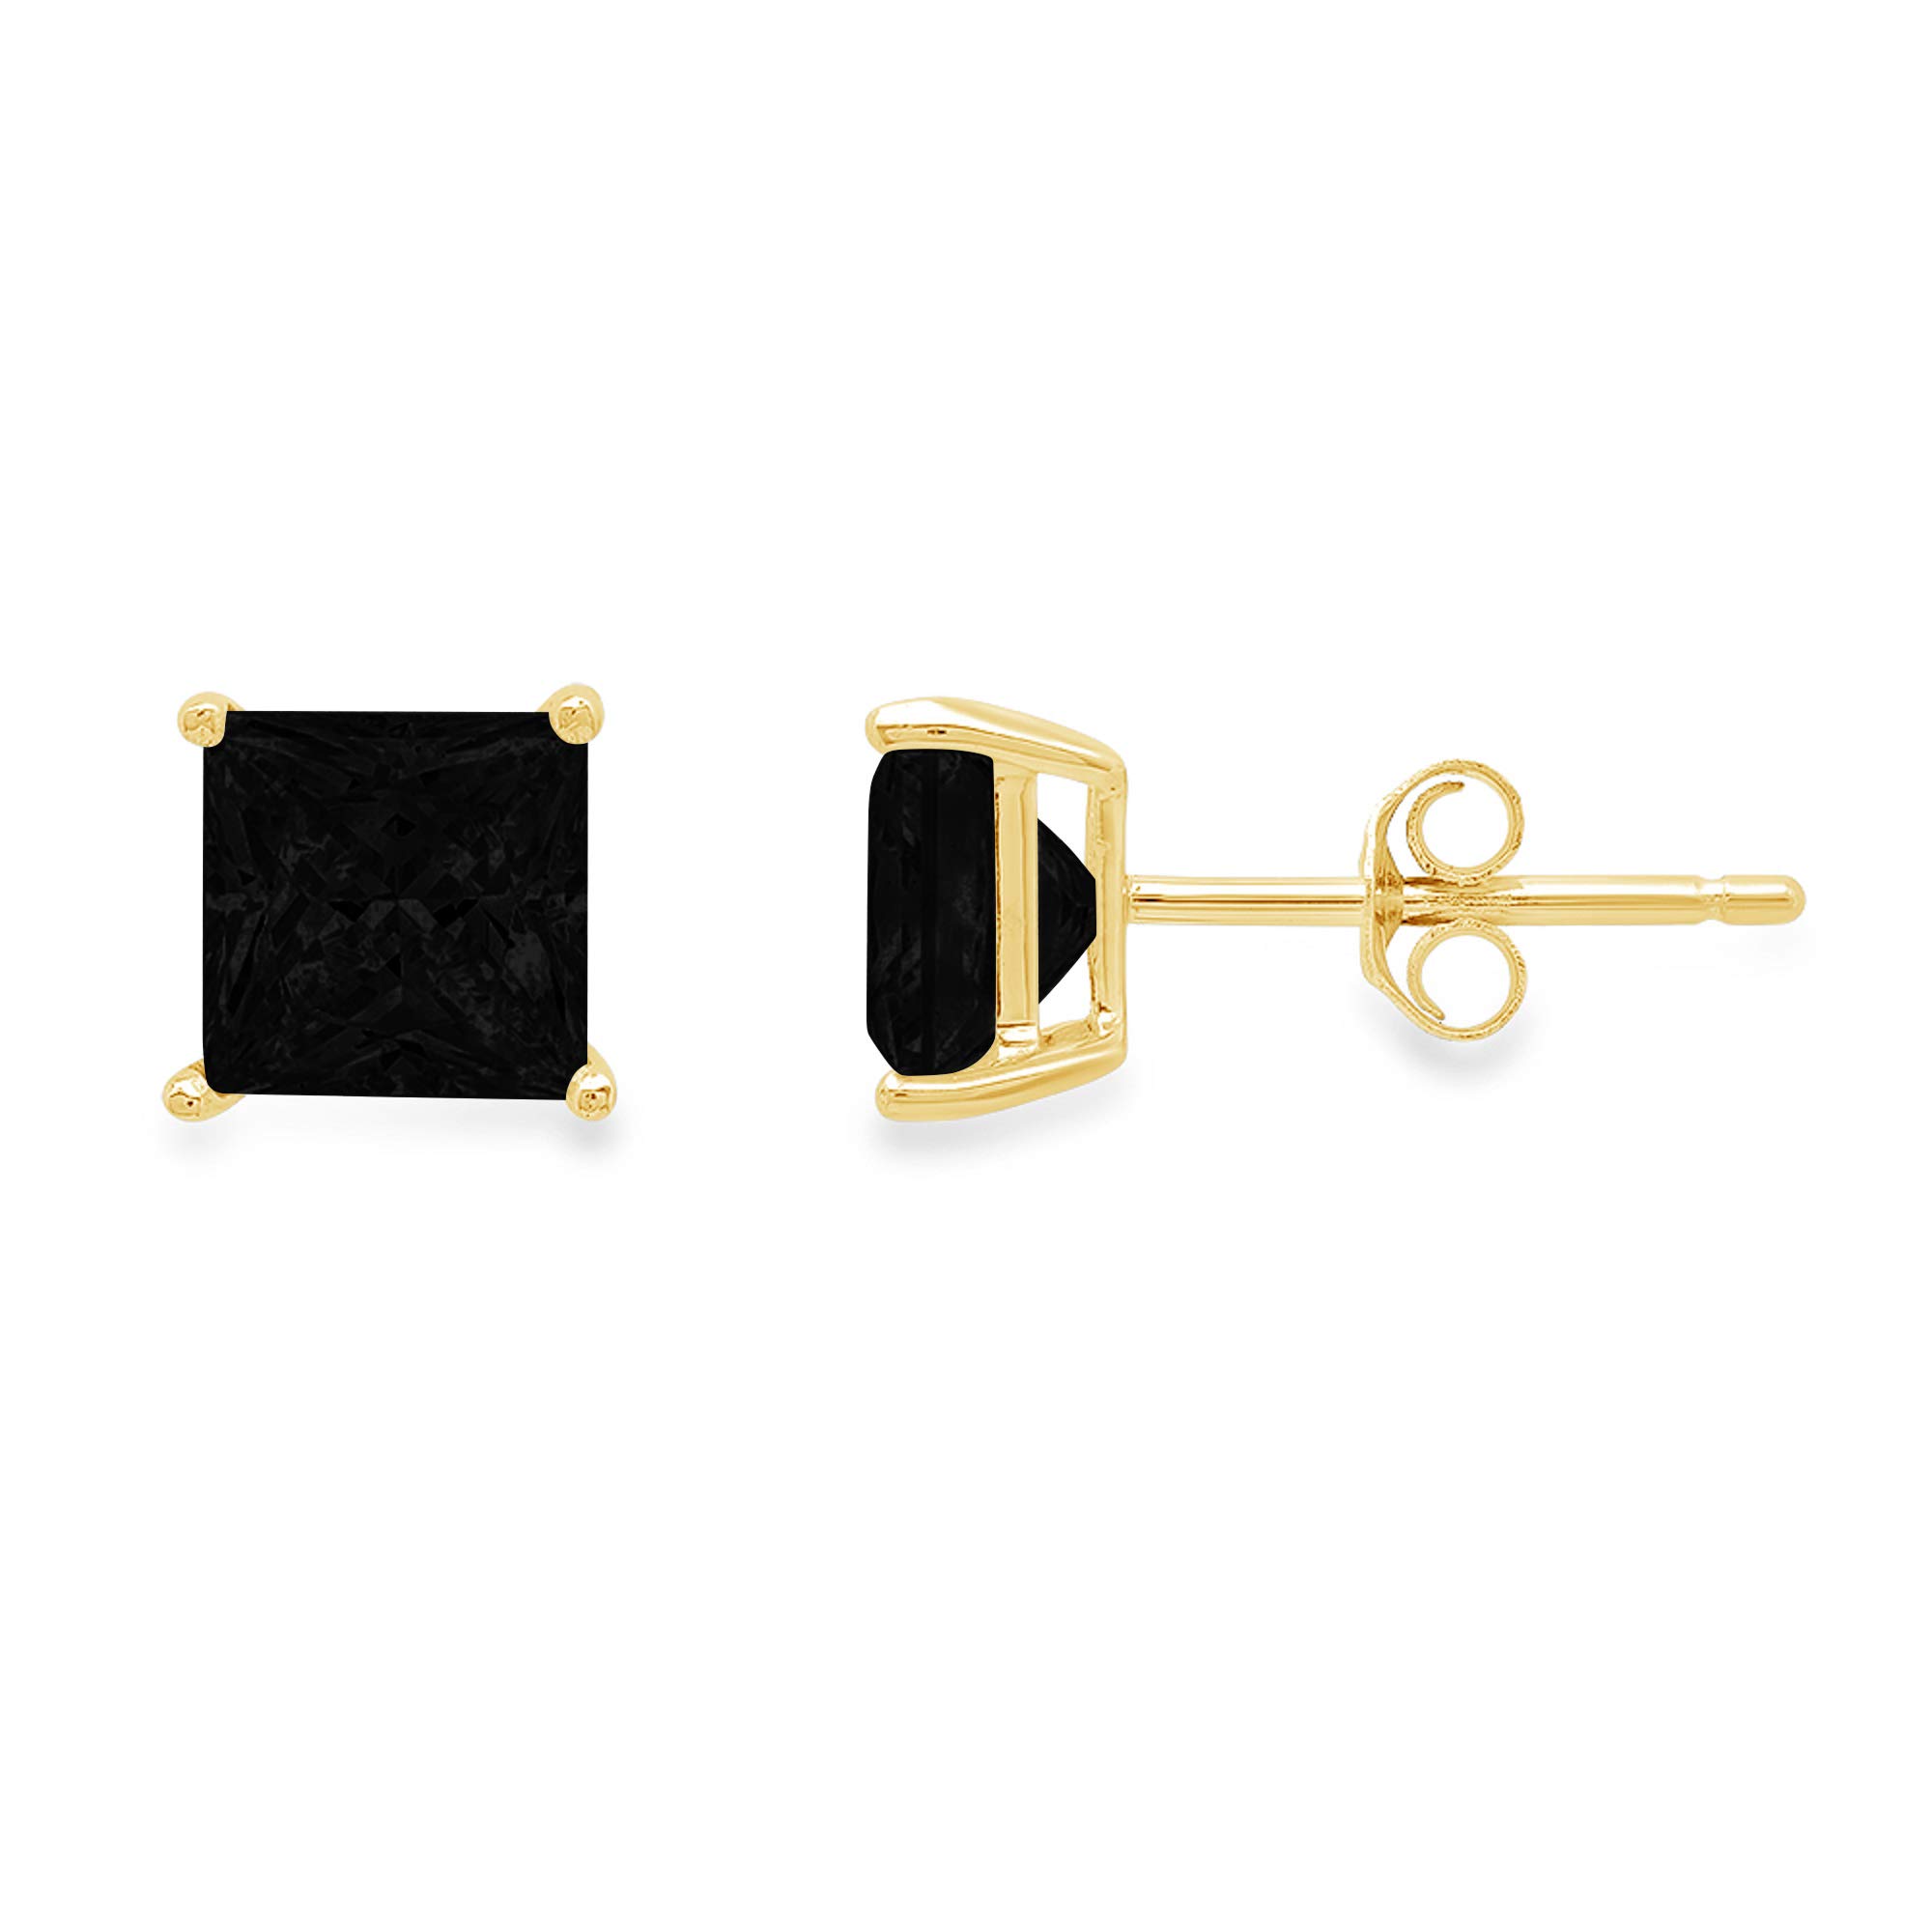 Clara Pucci 1.0 ct Brilliant Princess Cut Solitaire VVS1 Flawless Natural Black Onyx Gemstone Pair of Stud Earrings Solid 18K Yellow Gold Butterfly Push Back